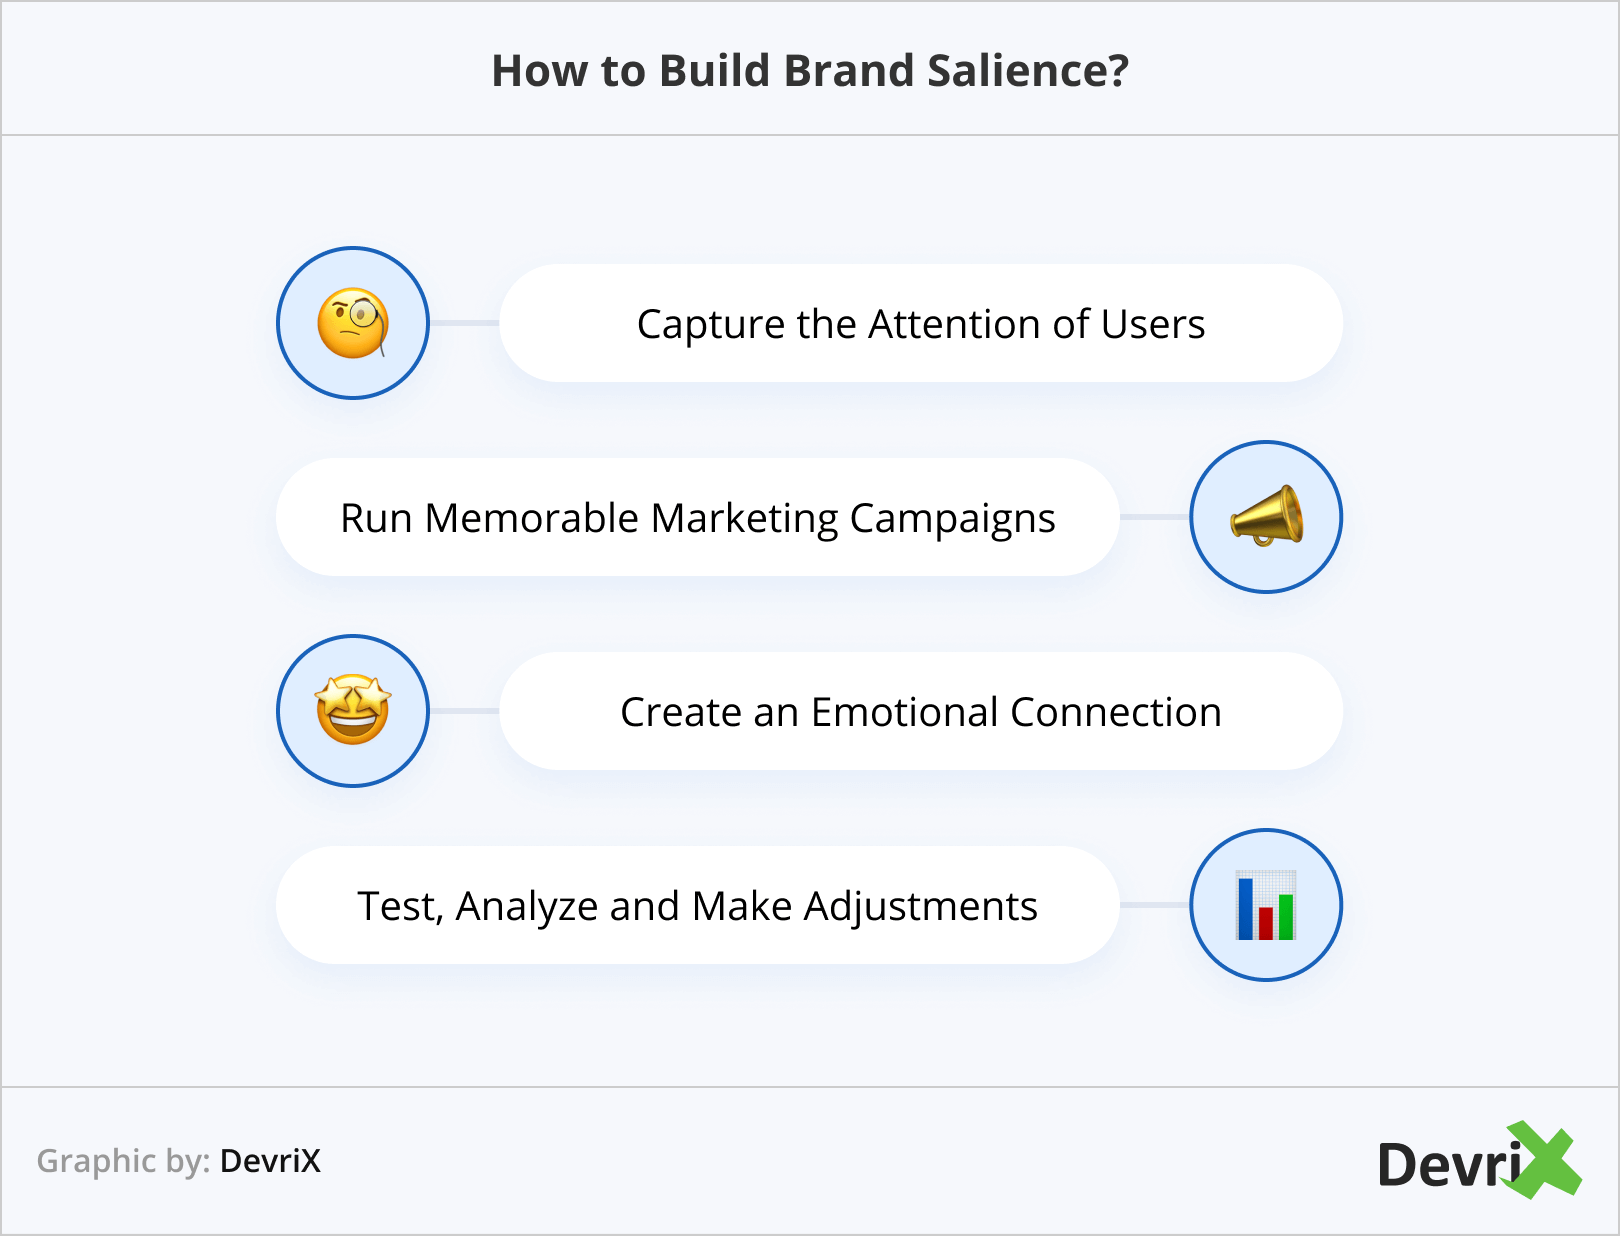 How to Build Brand Salience